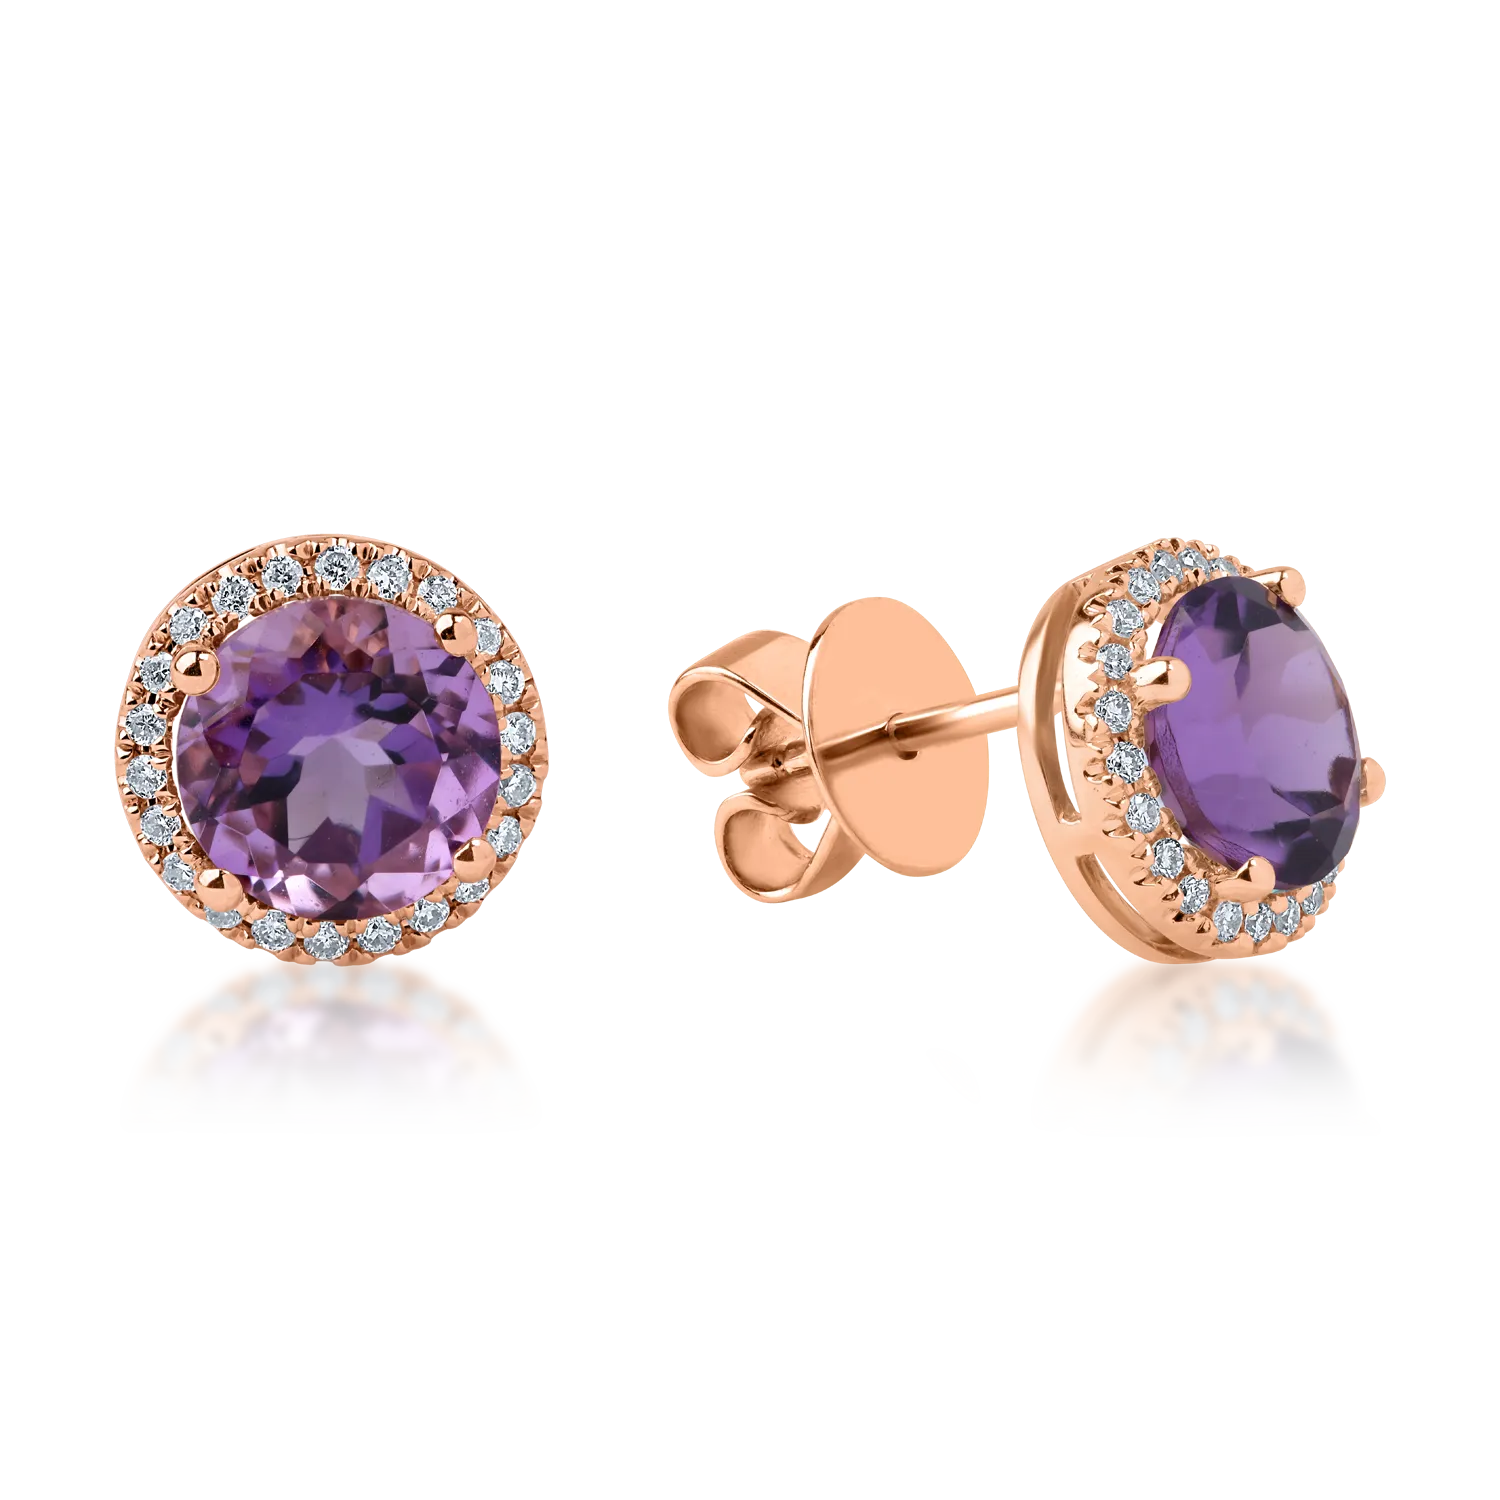 Rose gold earrings with 2.5ct amethysts and 0.2ct diamonds